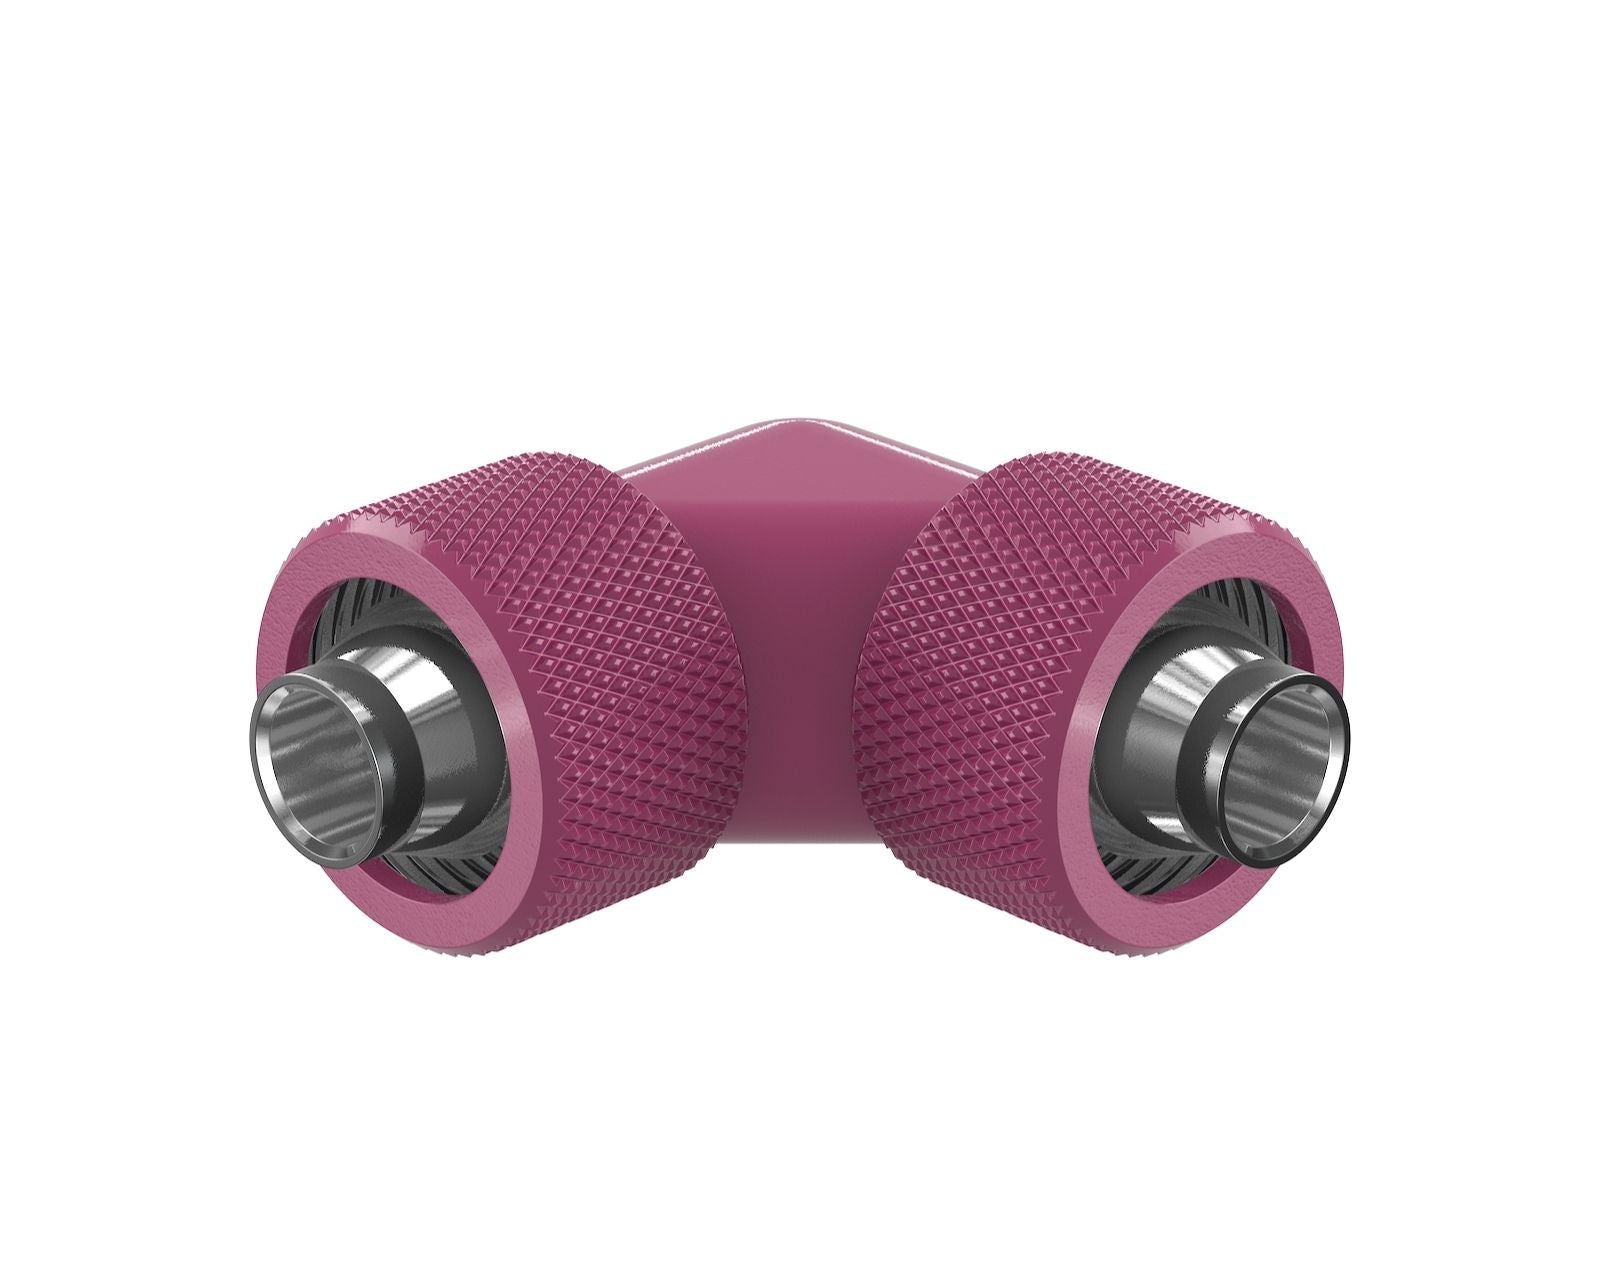 PrimoChill SecureFit SX - Premium 90 Degree Compression Fitting Set For 7/16in ID x 5/8in OD Flexible Tubing (F-SFSX75890) - Available in 20+ Colors, Custom Watercooling Loop Ready - Magenta